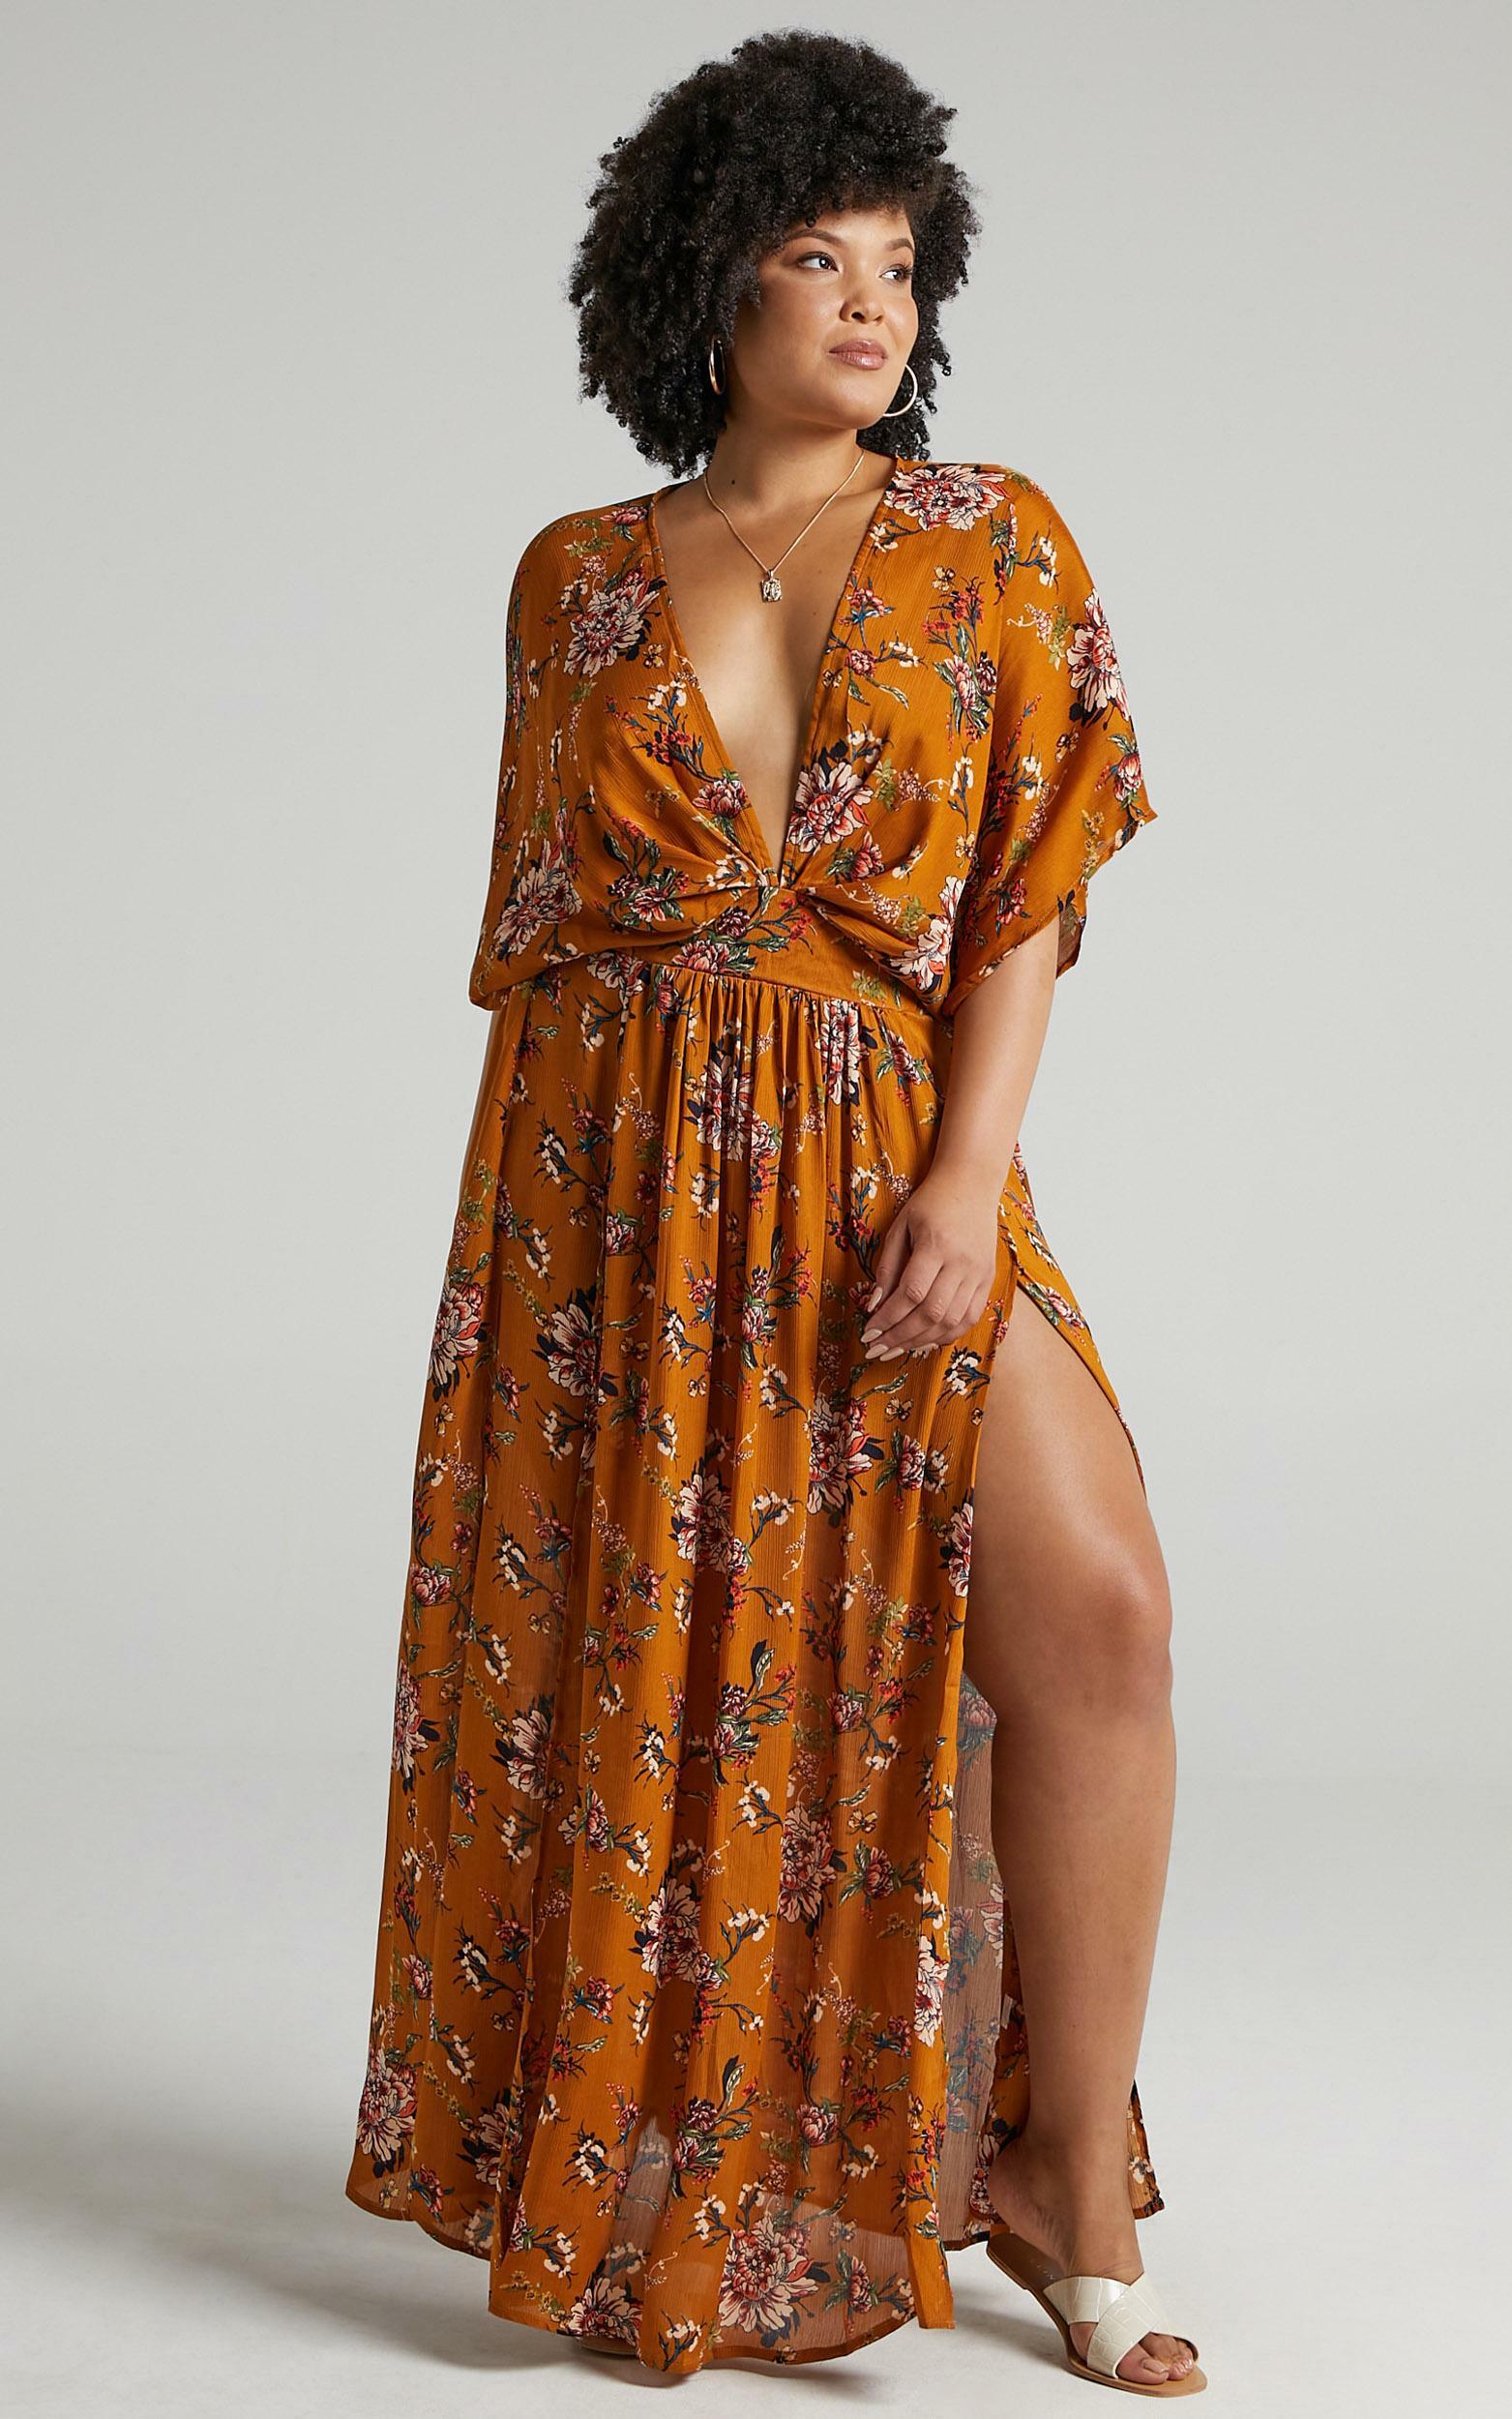 Vacay Ready Maxi Dress in Mustard Floral - 04, YEL8, hi-res image number null